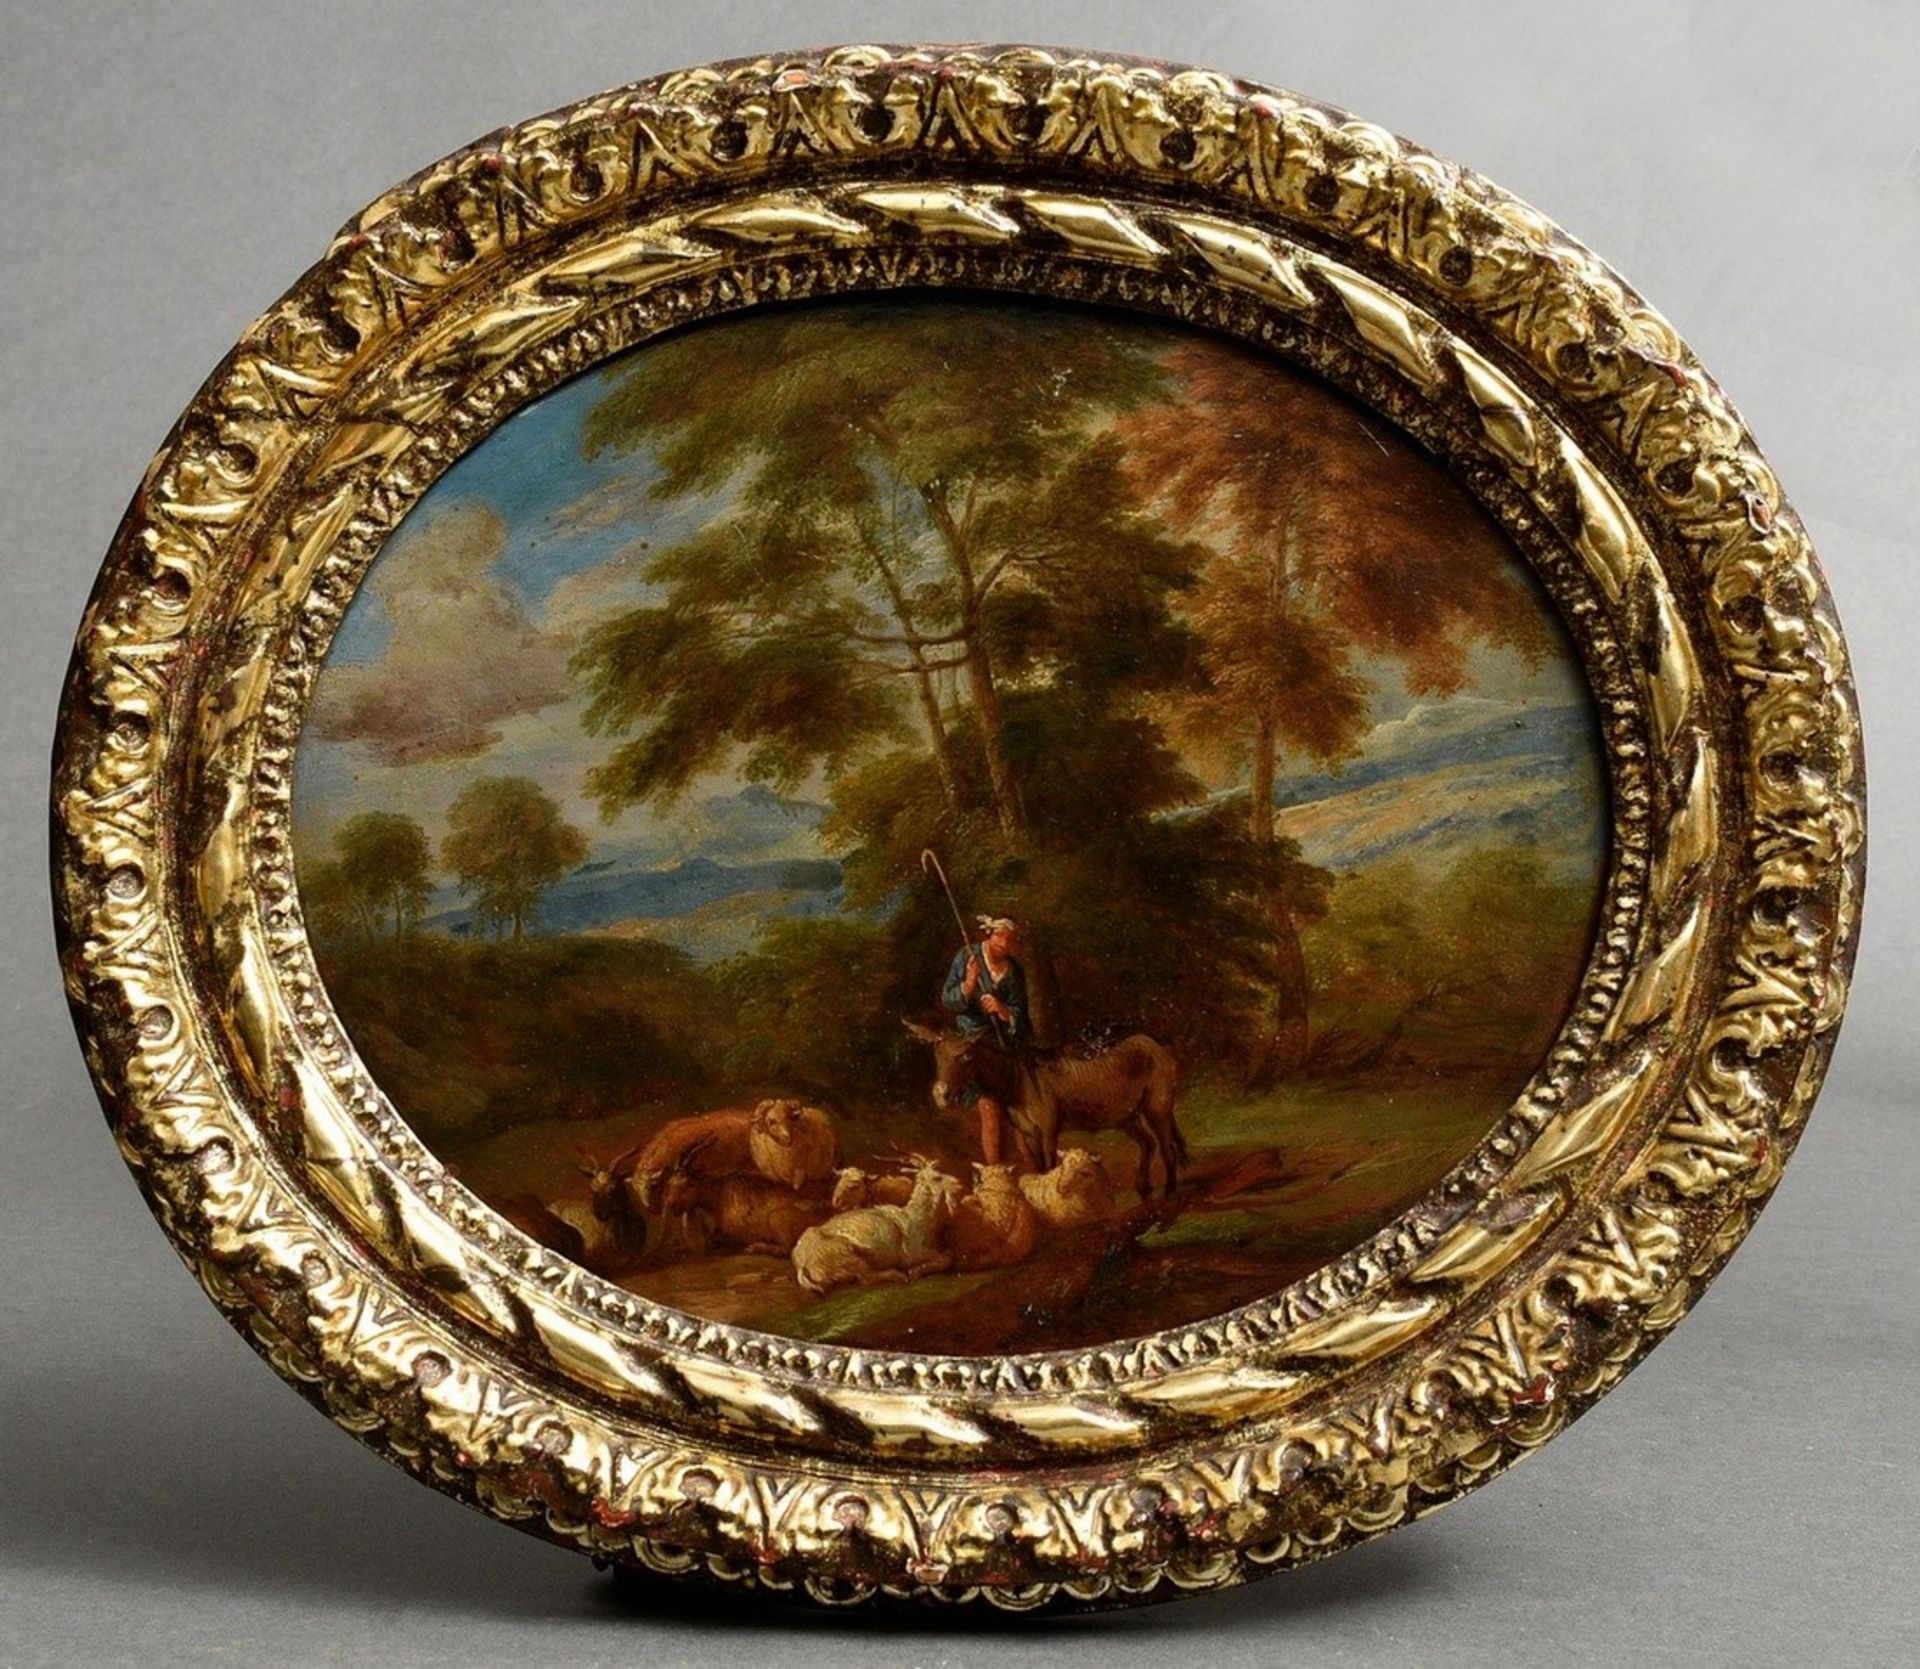 Unknown artist of the 17th/18th c. "Shepherd with flock in an Arcadian landscape", oil/copper, oval